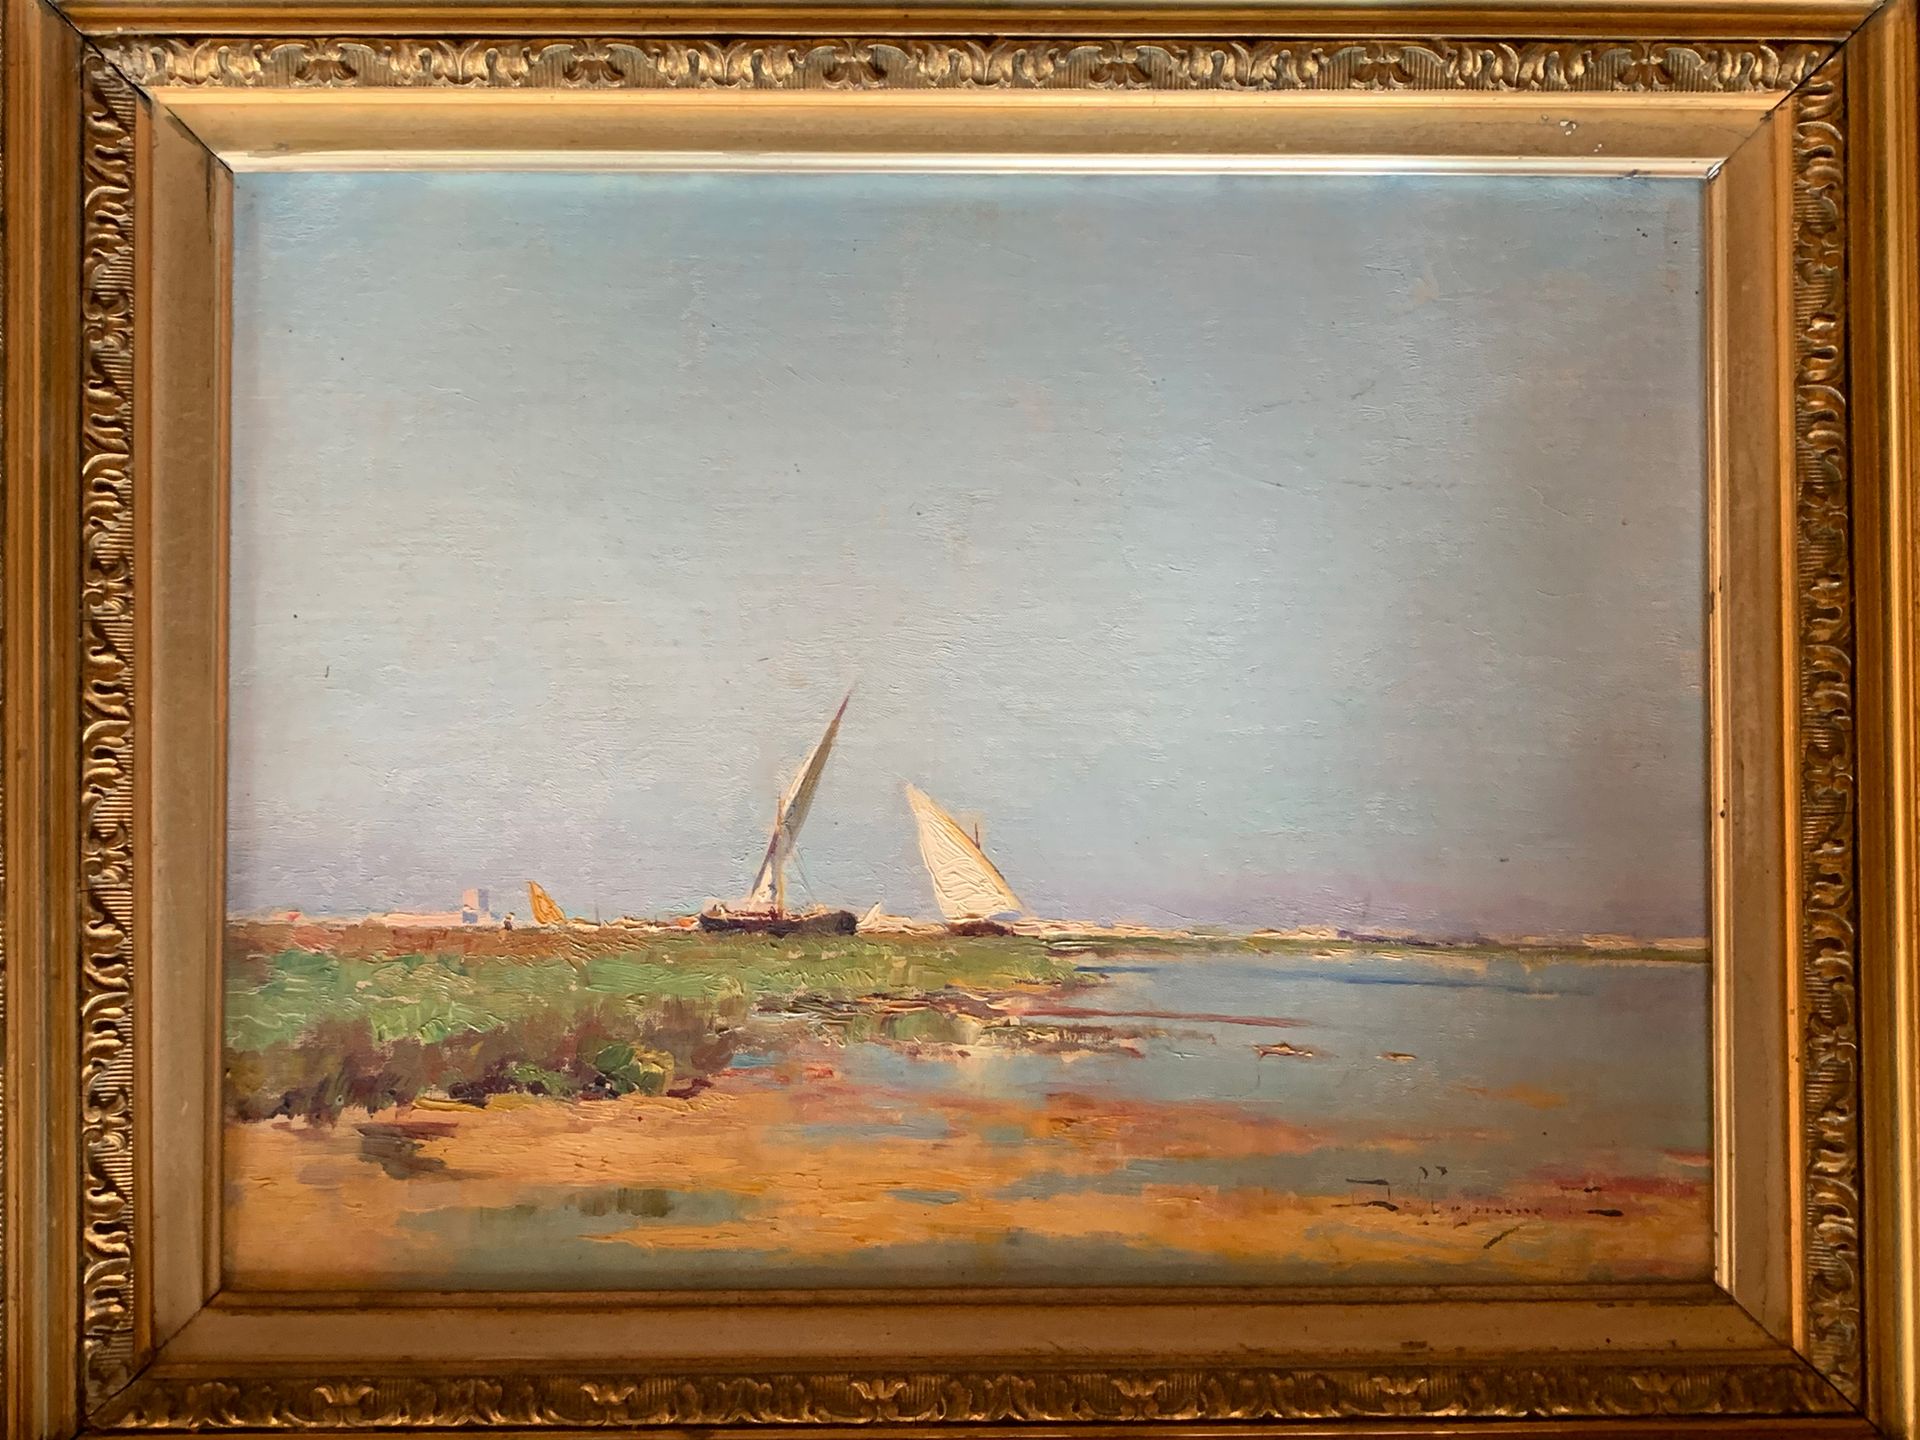 École Orientaliste The sailboats
Oil on canvas signed indistinctly lower right
H&hellip;